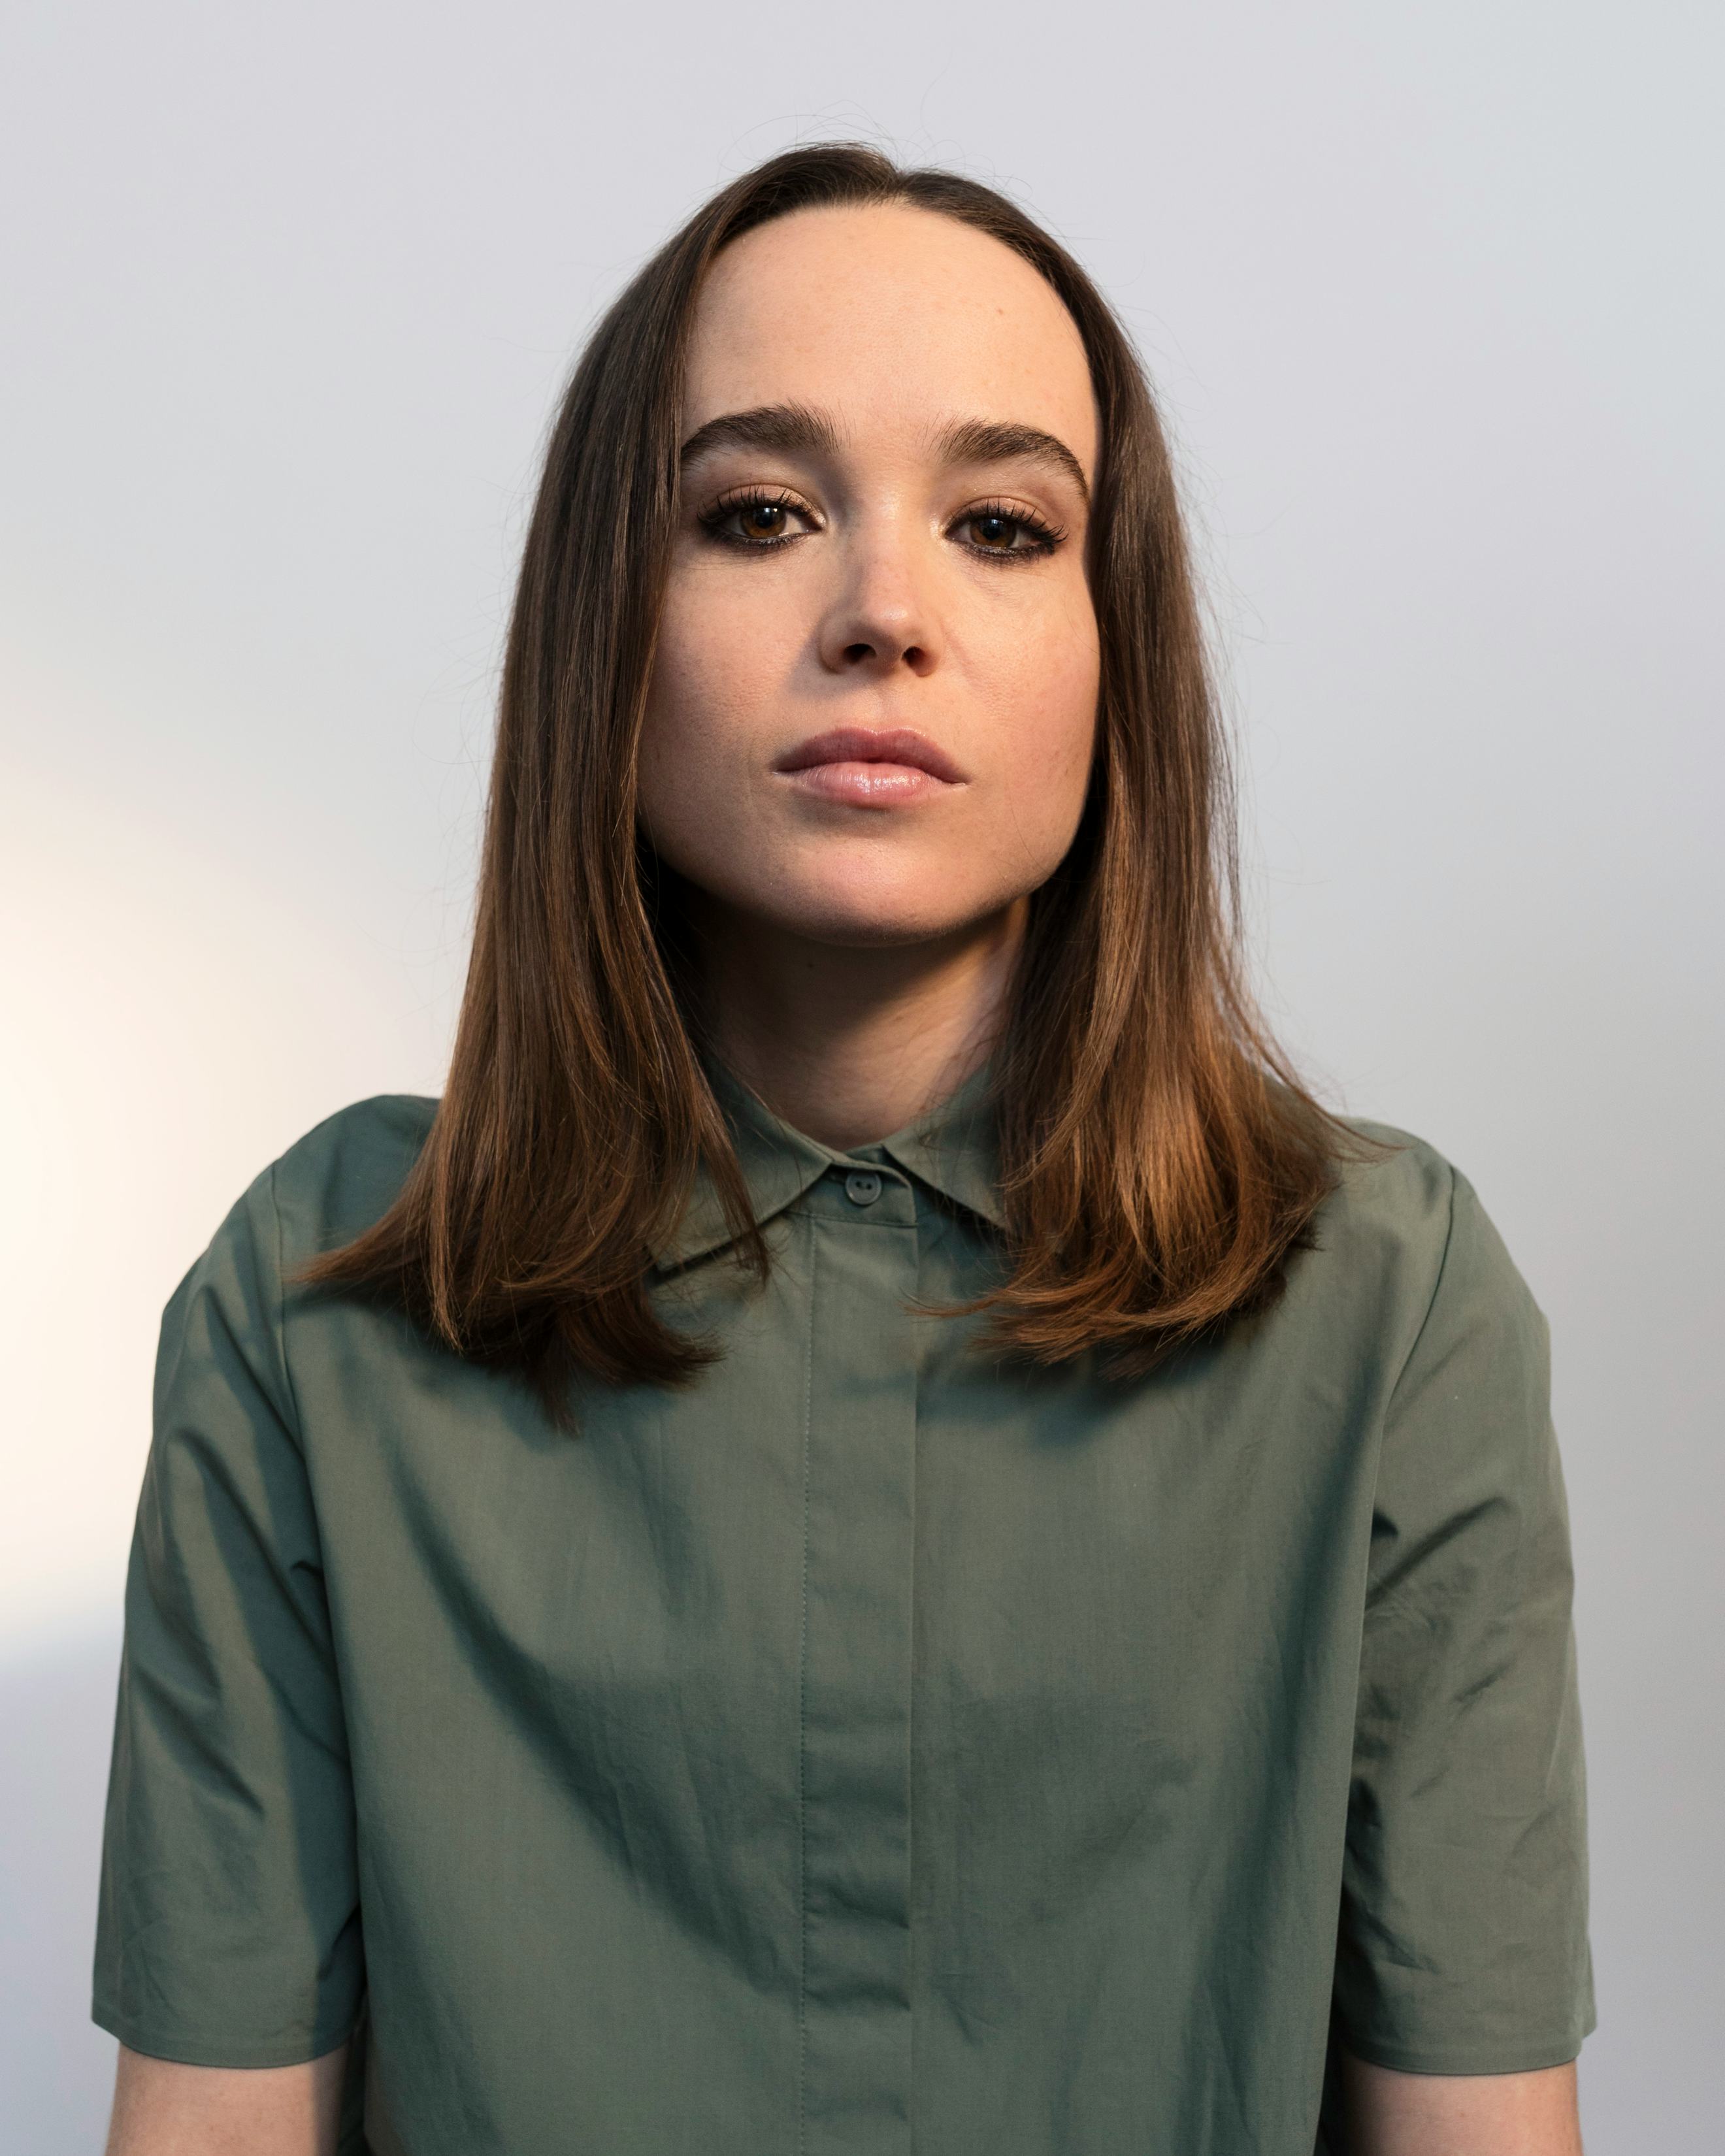 Ellen Page Is Sick & Tired Of Hollywood Talking About Change Instead Of ...